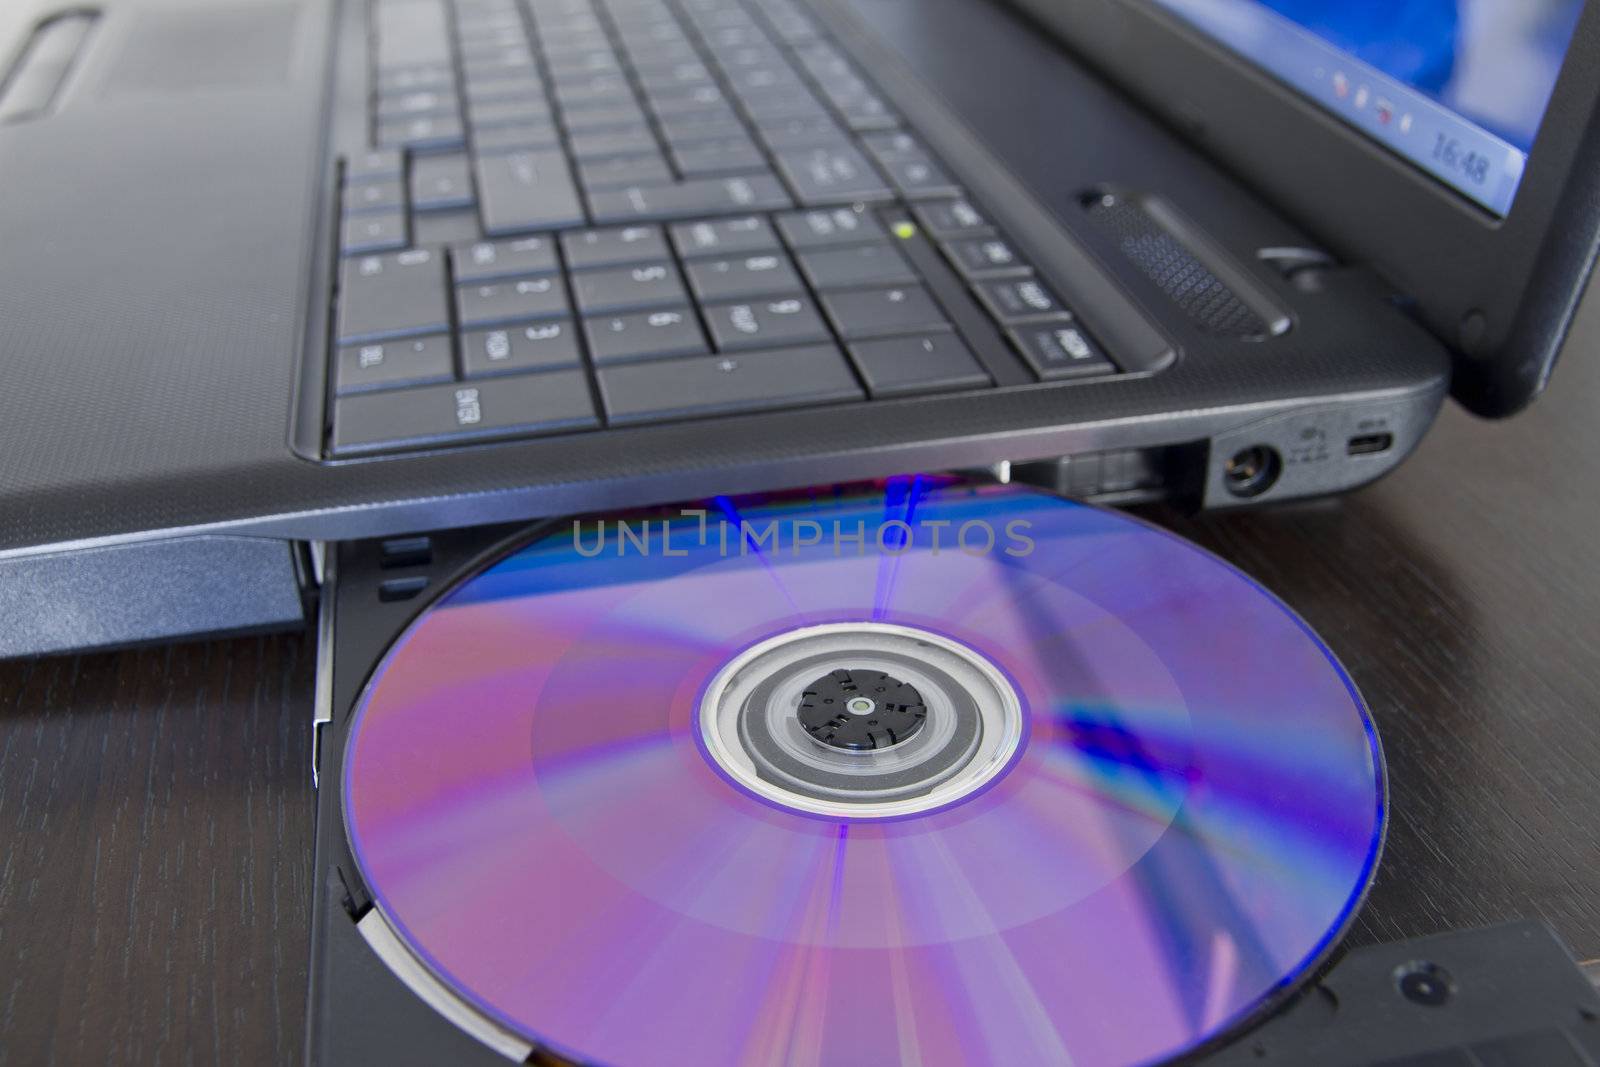 Laptop with a cd in the tray